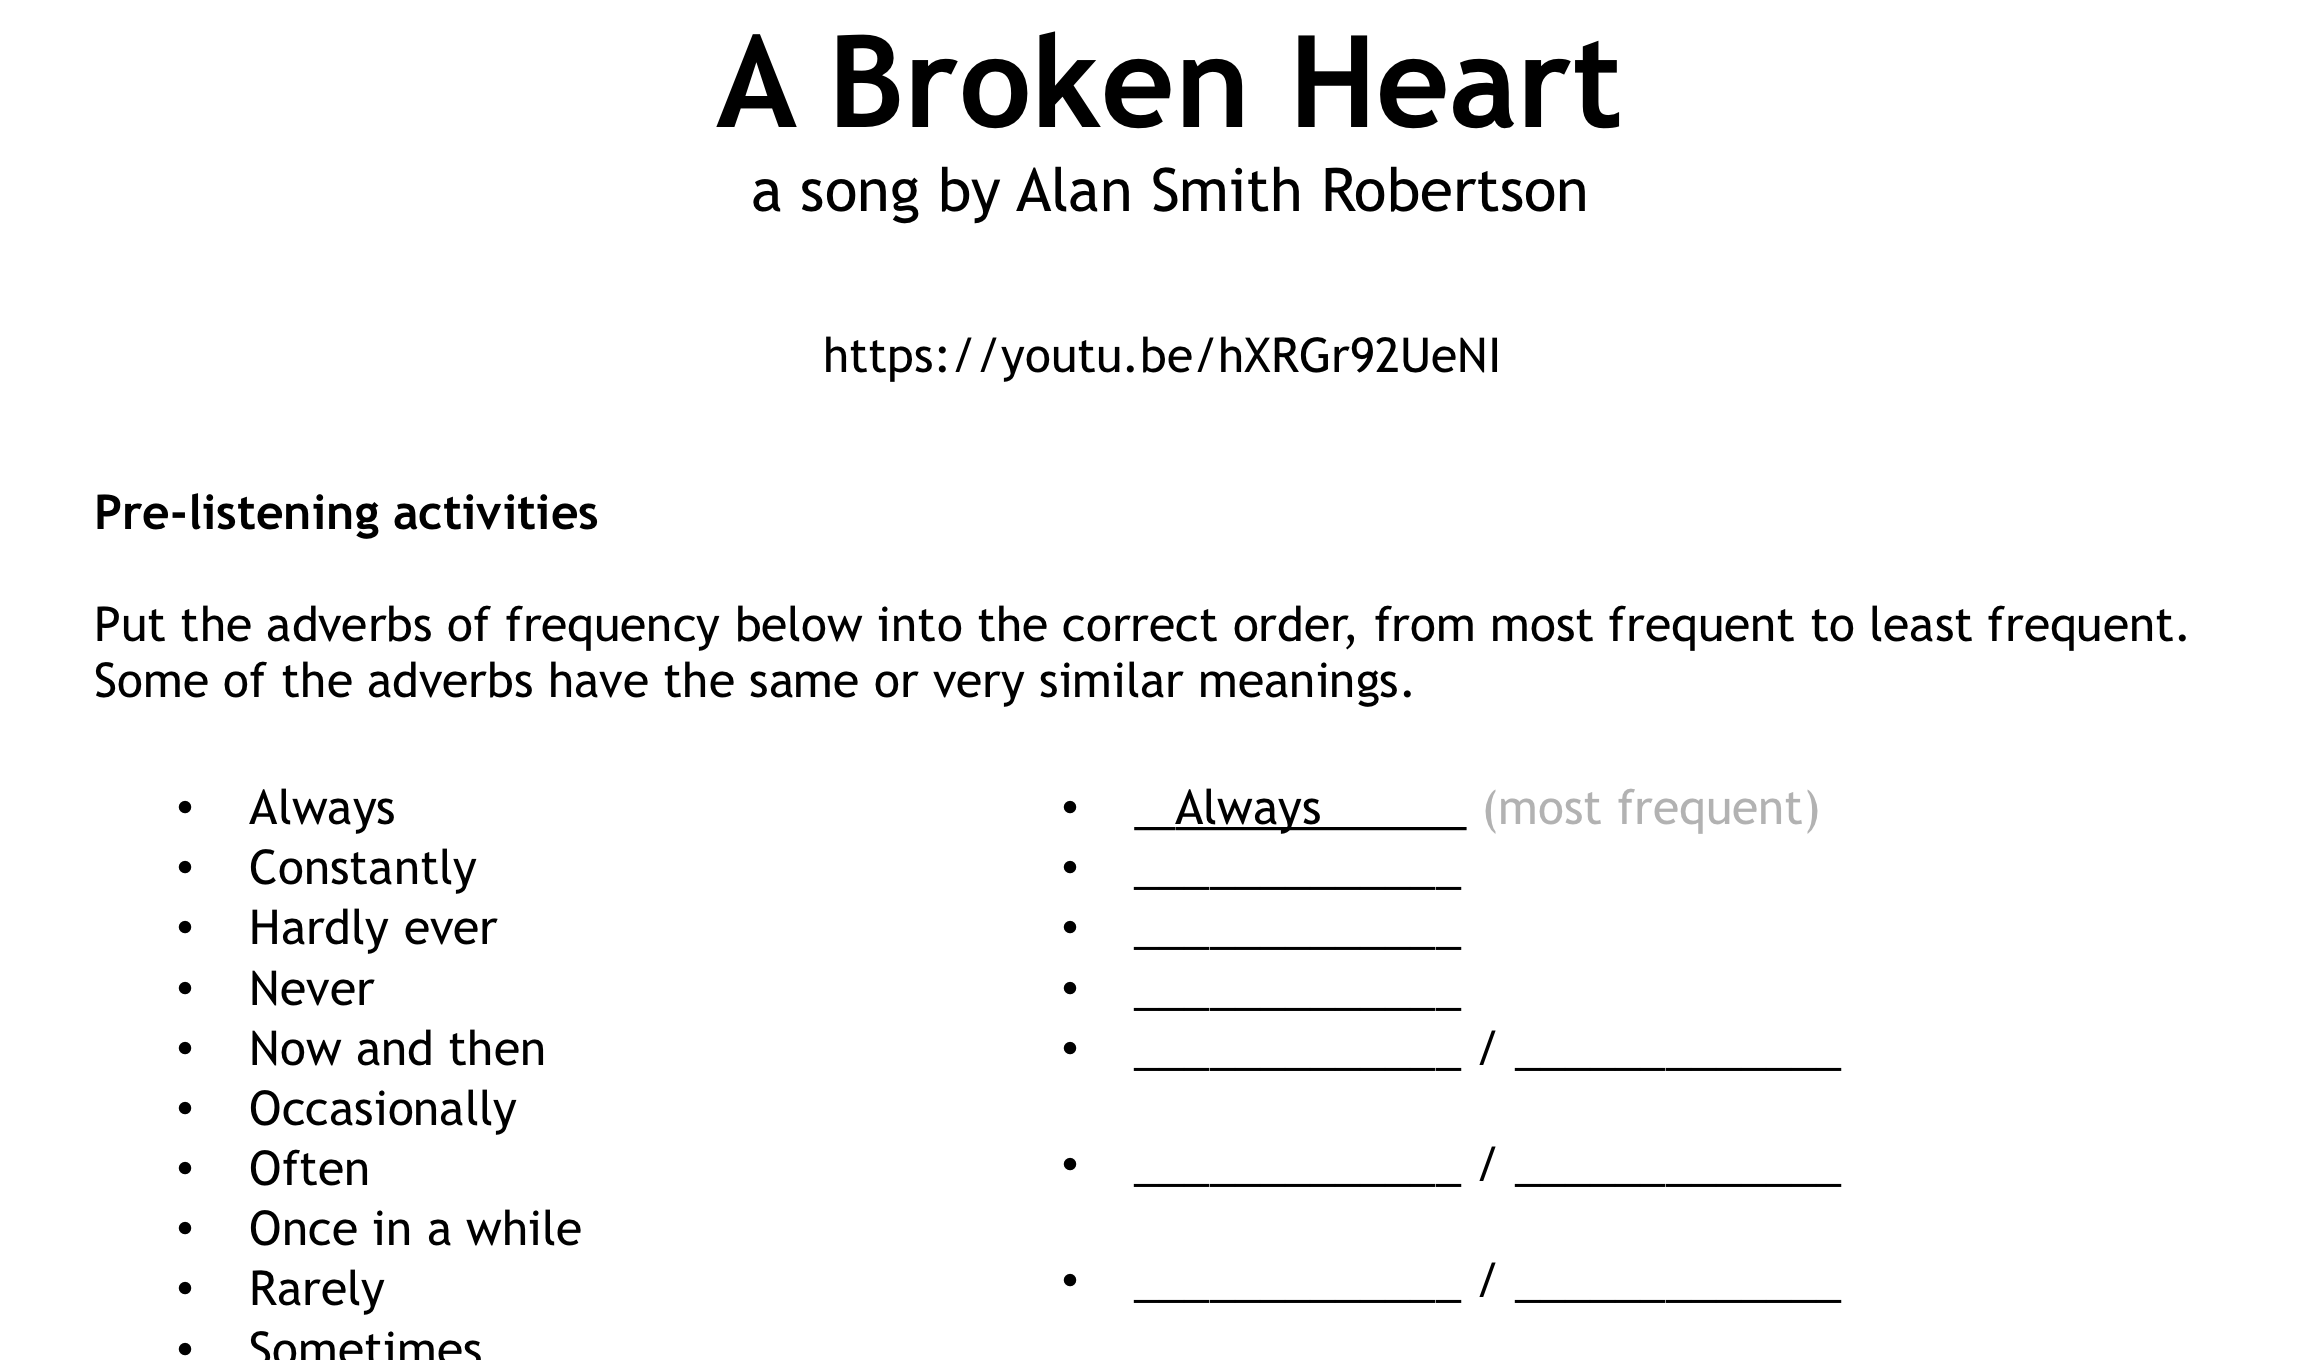 song-worksheet-a-broken-heart-adverbs-of-frequency